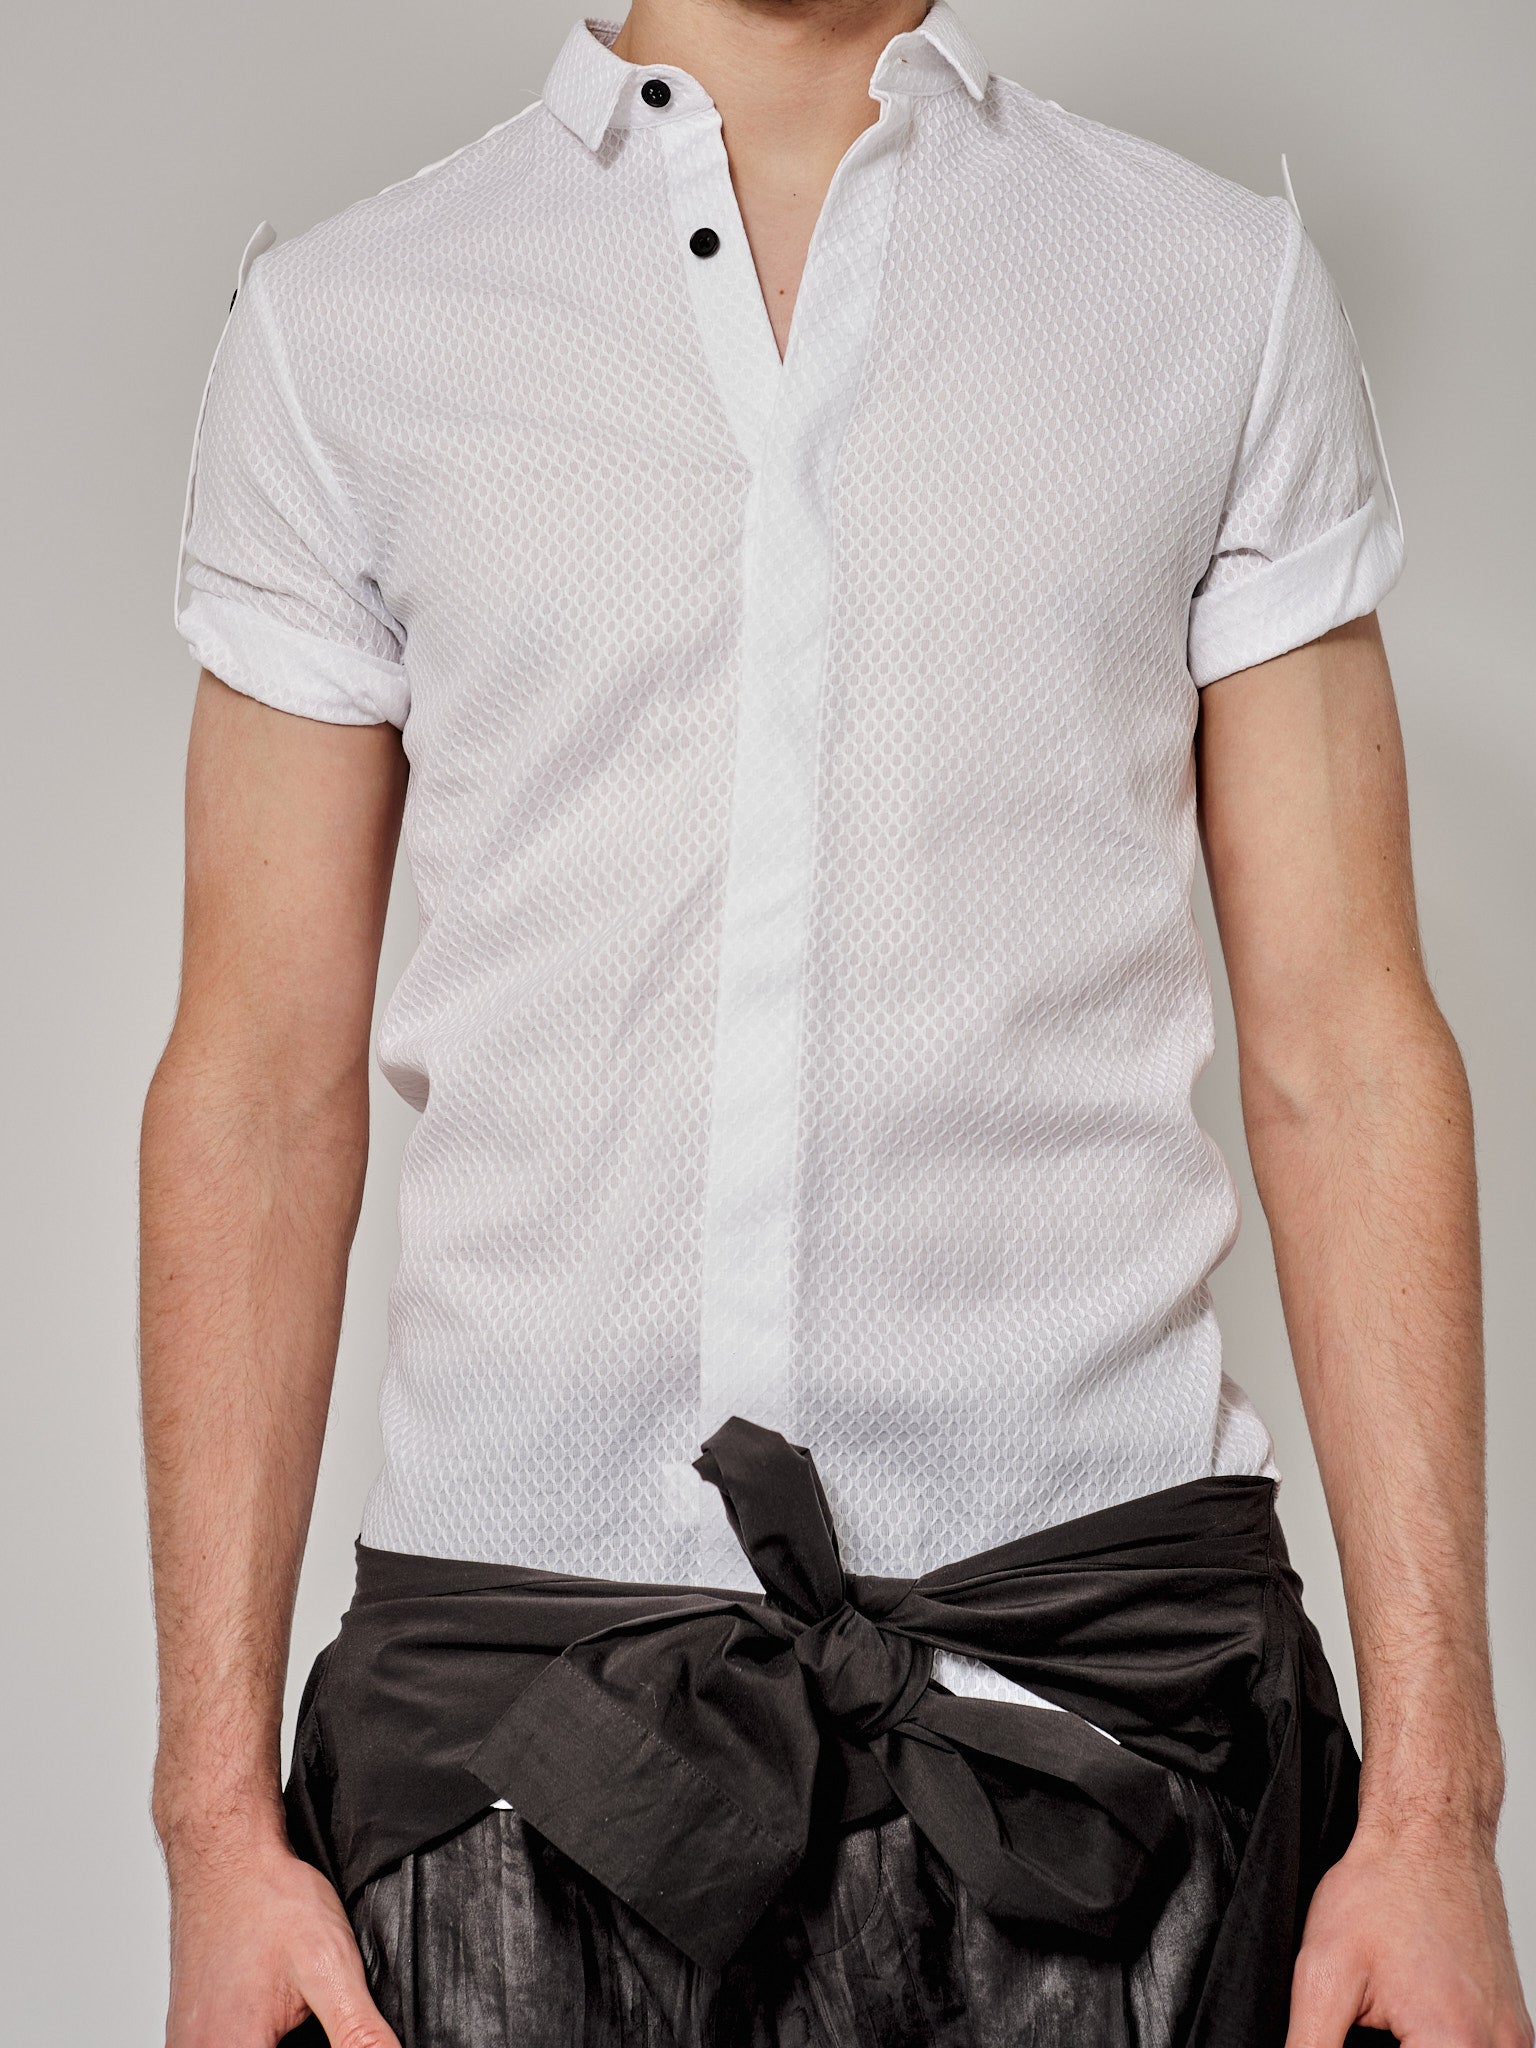 White Button Up Shirt With Ruffled Detailing